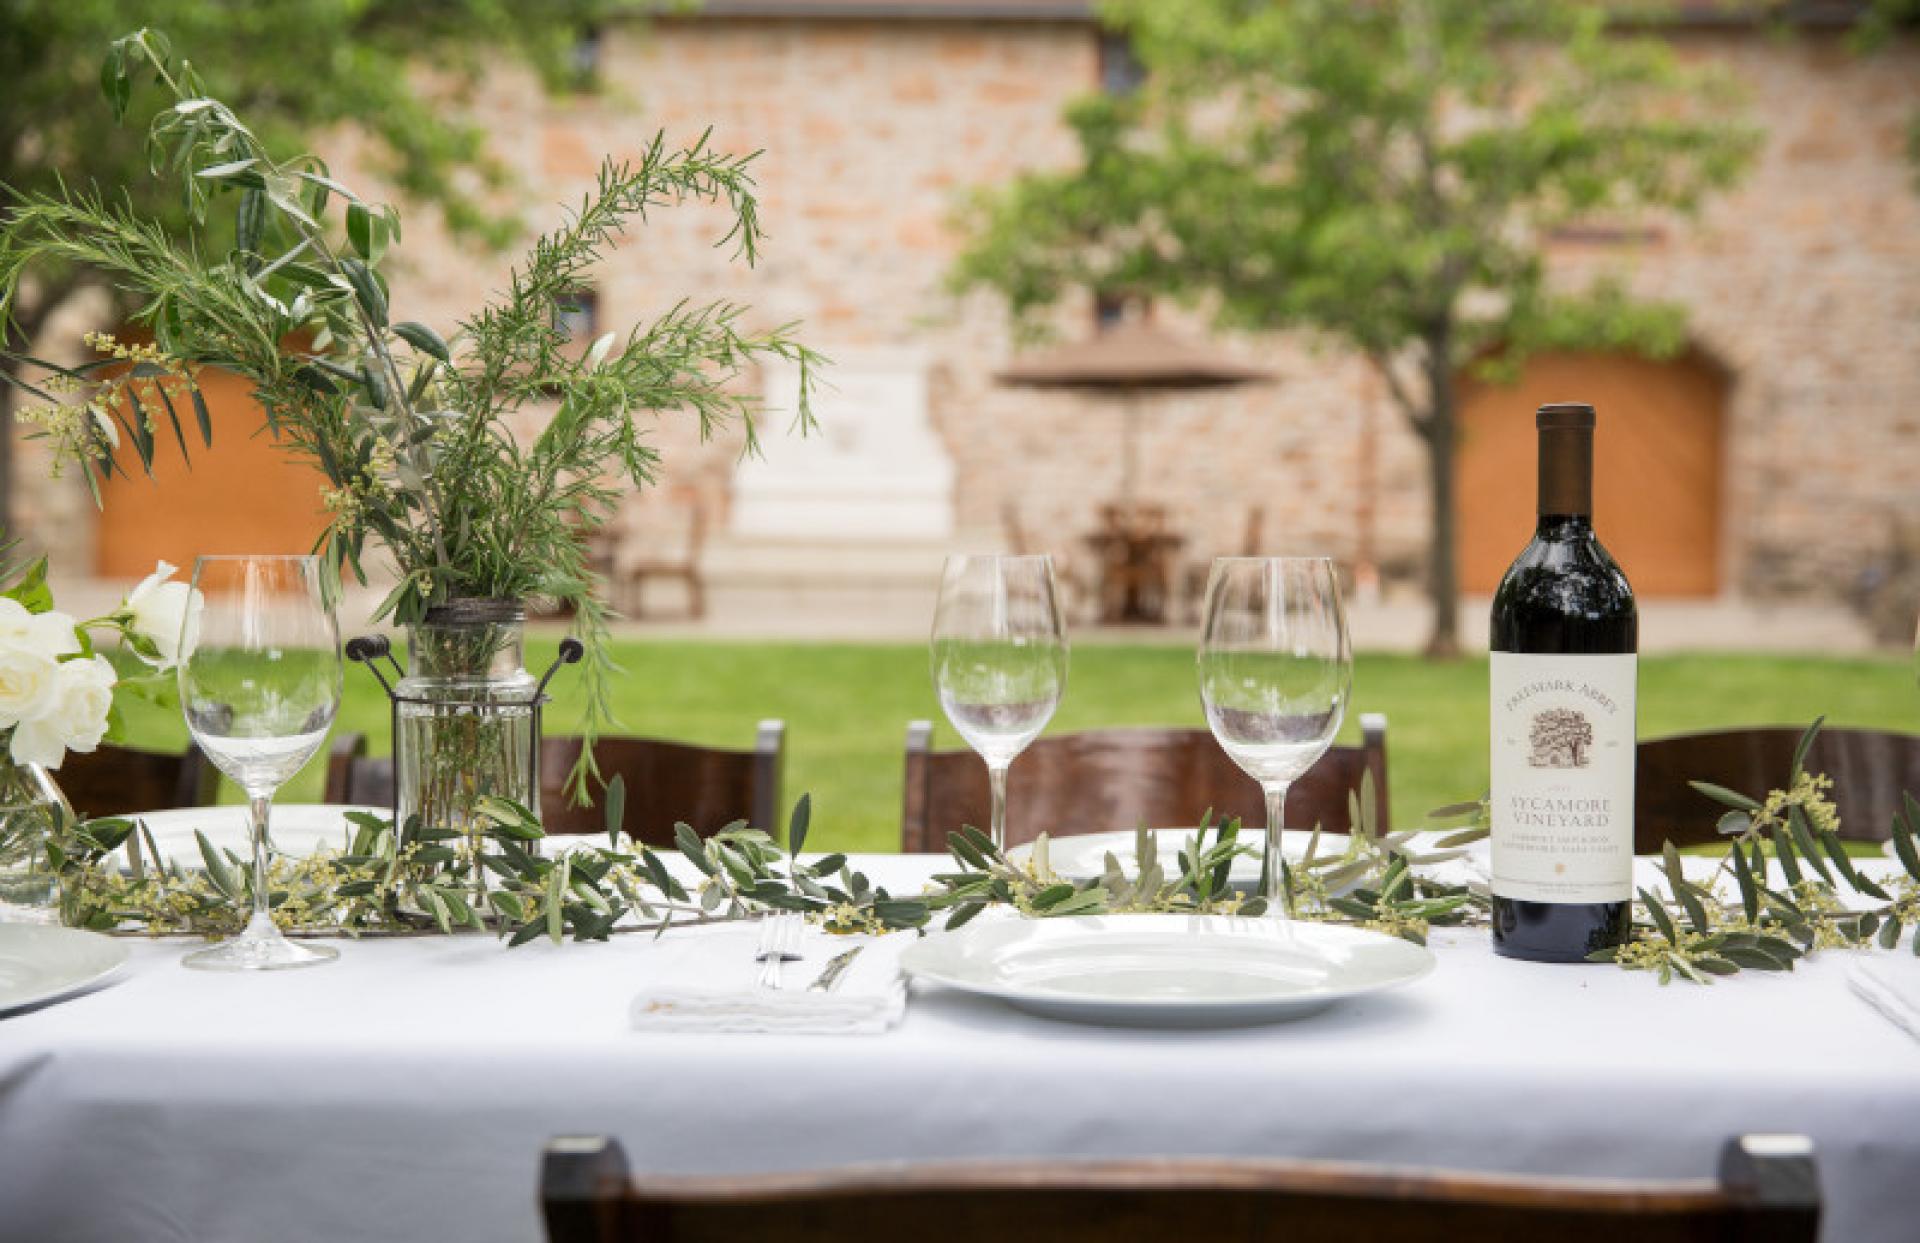 Gather for our new Recipe that pairs with the 2019 Oakville Cabernet Sauvignon